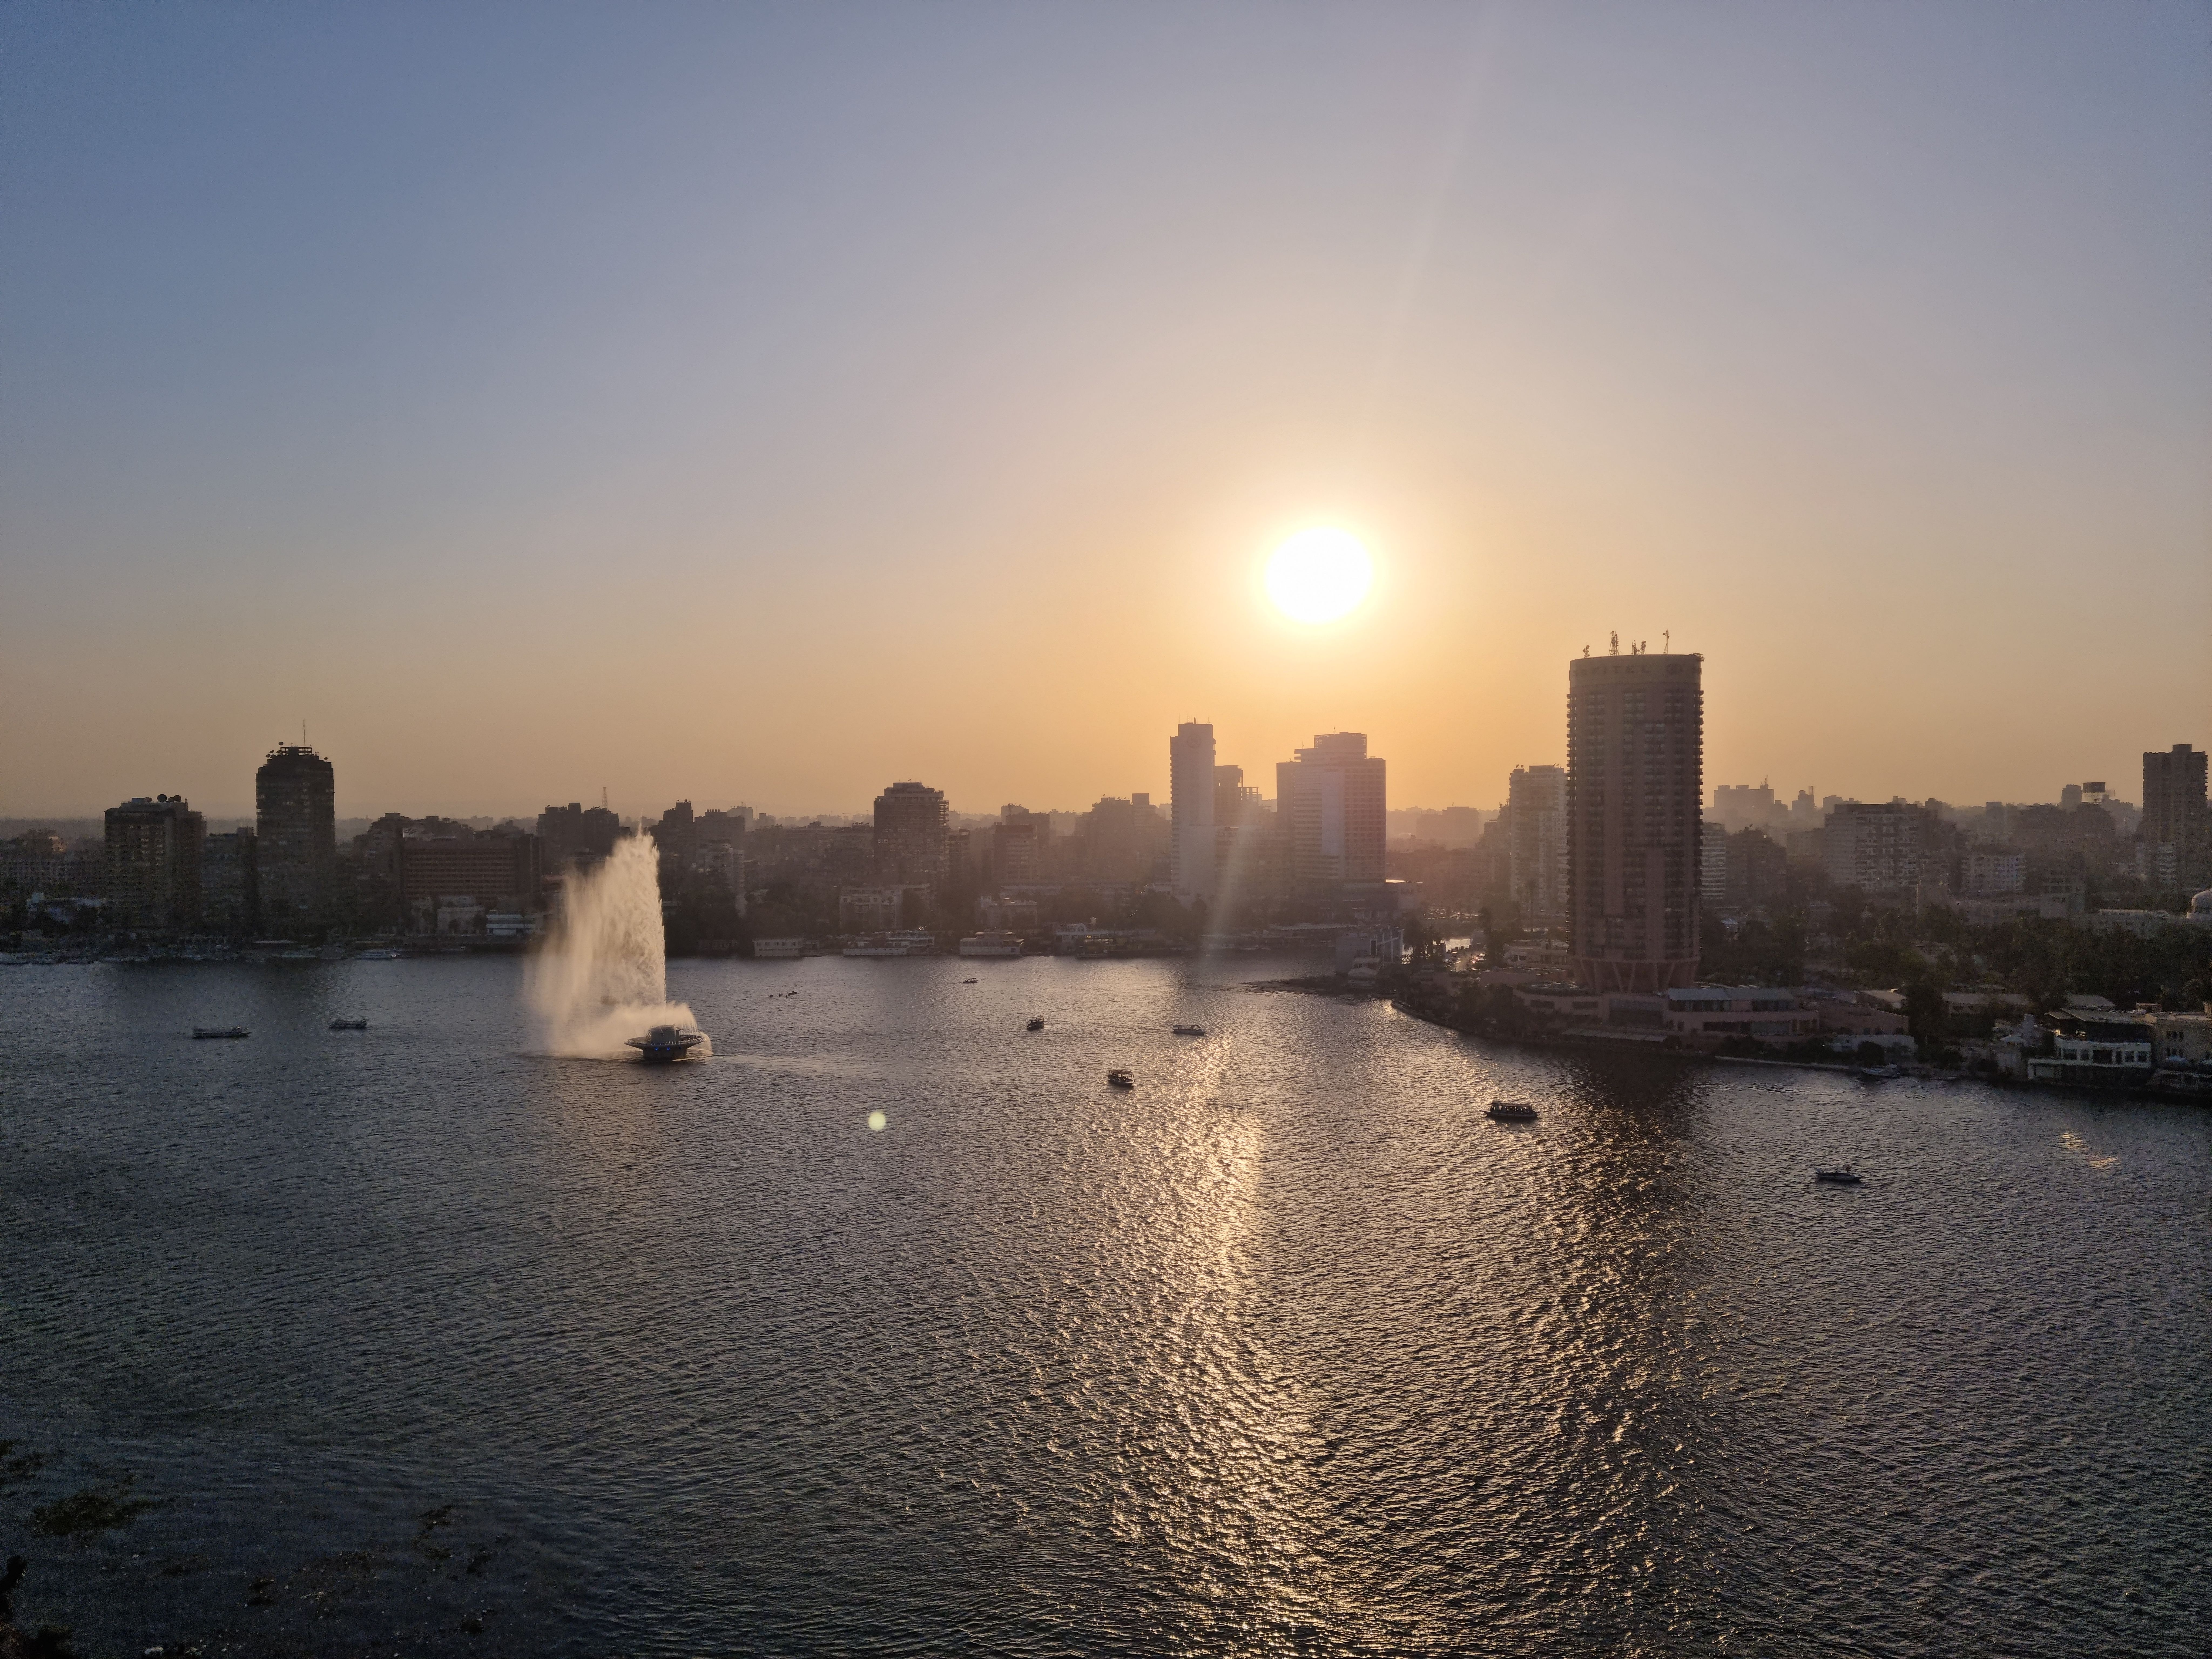 View of the Nile from Four Seasons Hotel